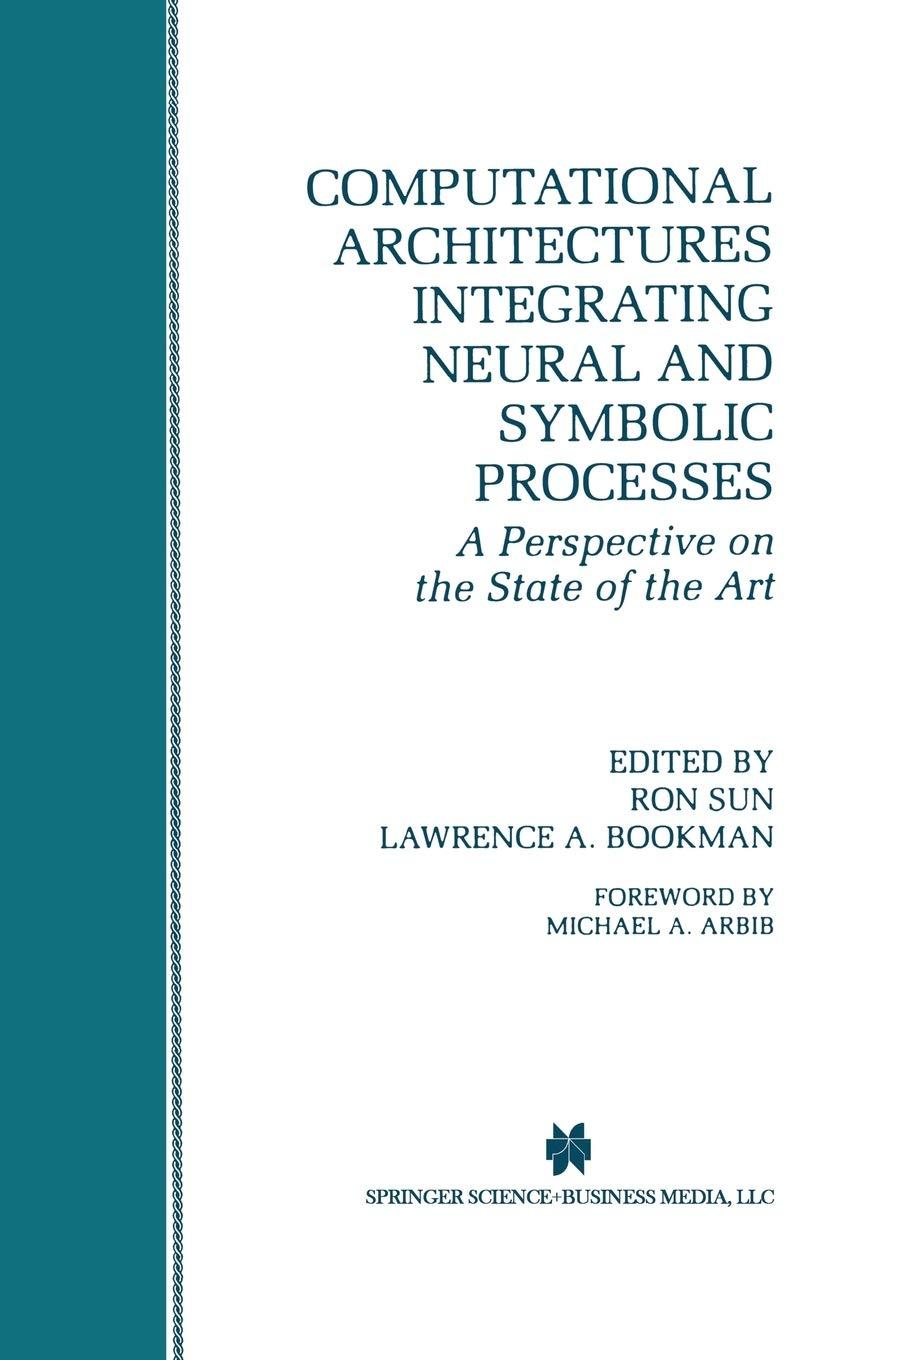 computational architectures integrating neural and symbolic processes 1996 edition ron sun, lawrence a.